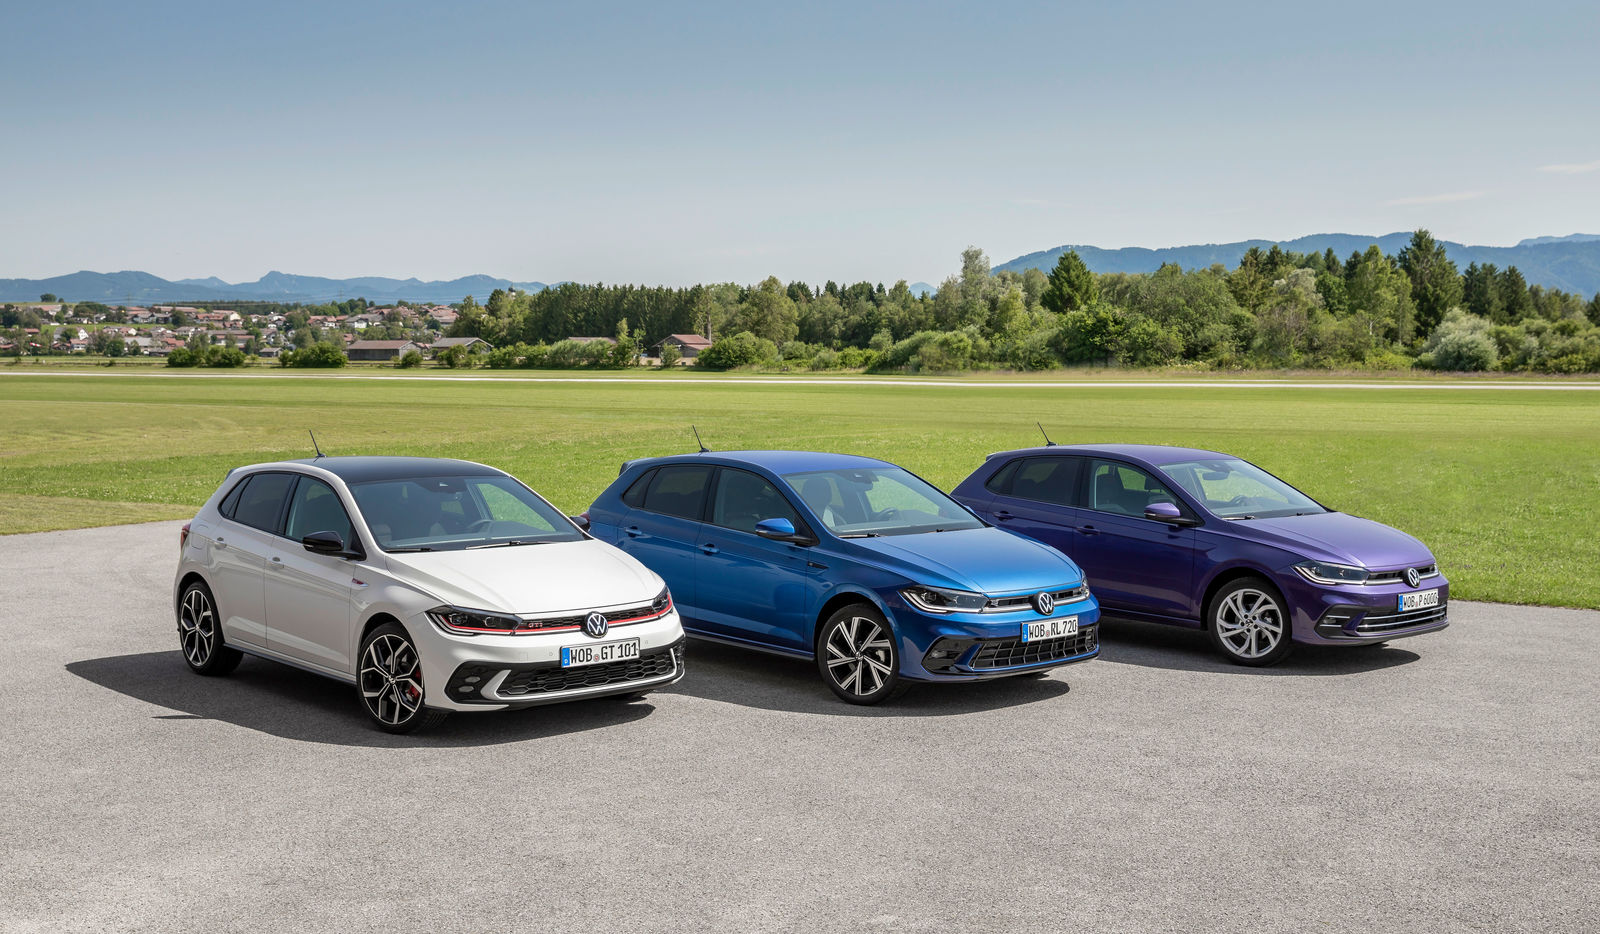 The new Volkswagen Polo and Polo GTI